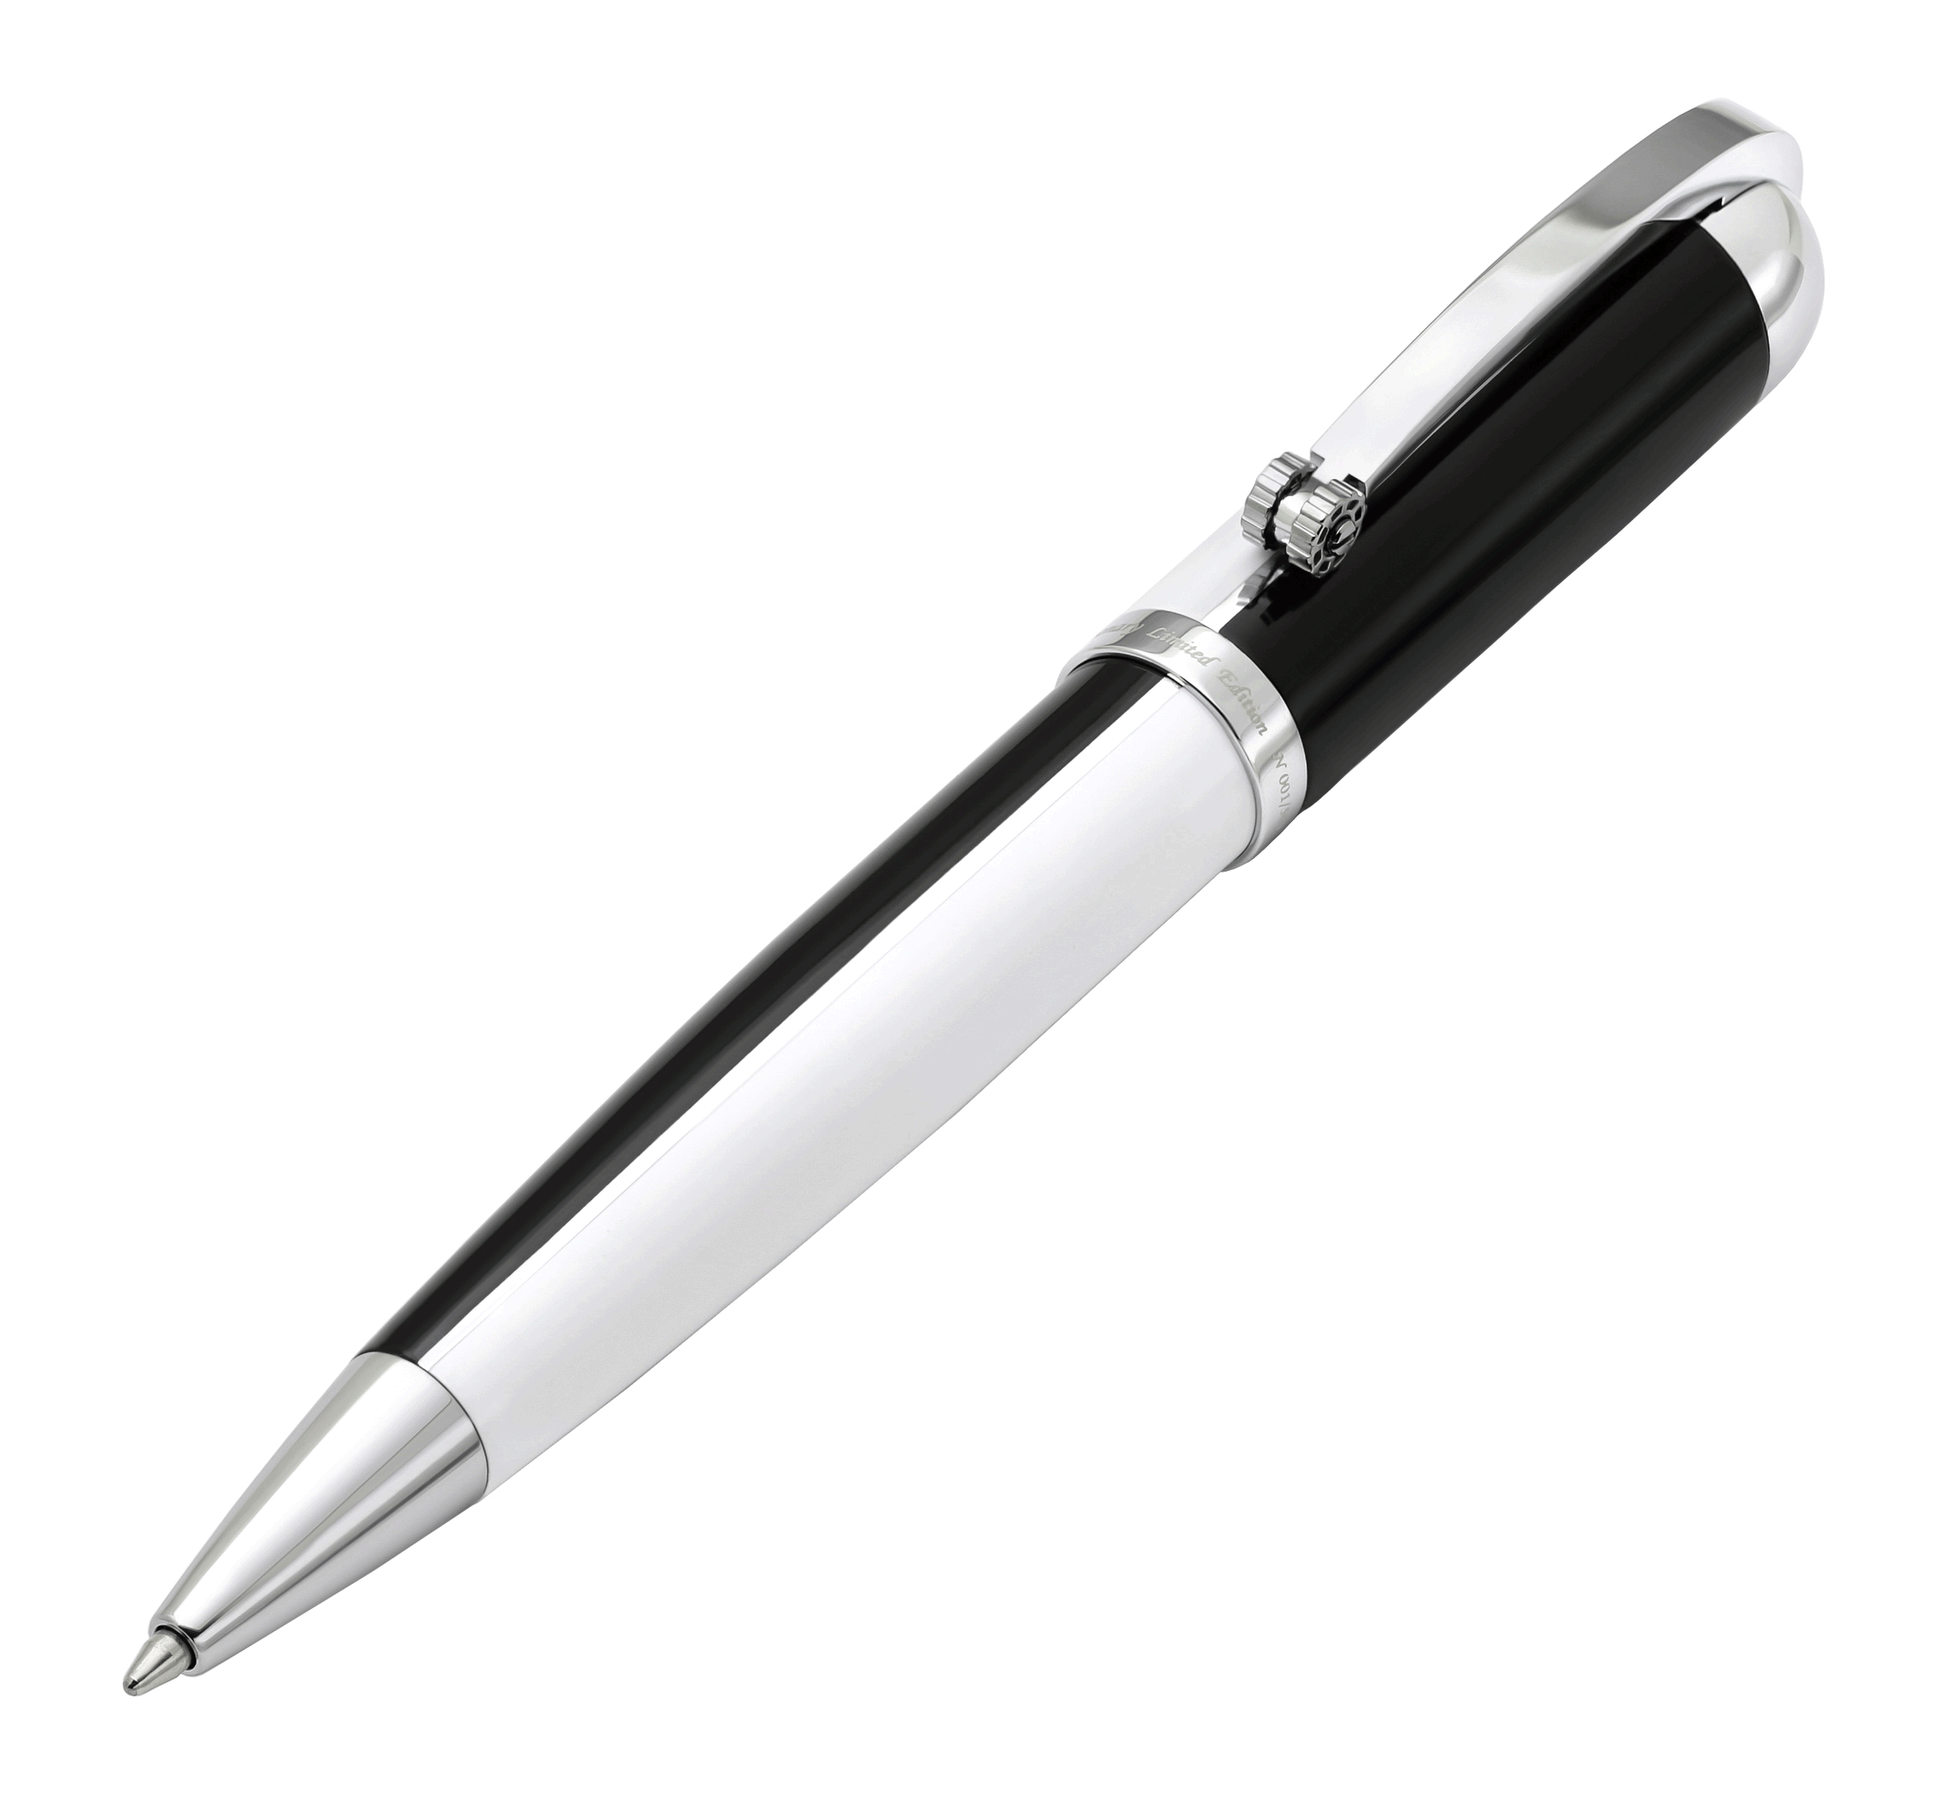 Xezo - Angled 3D view of the front of the Visionary Black/White B Ballpoint pen